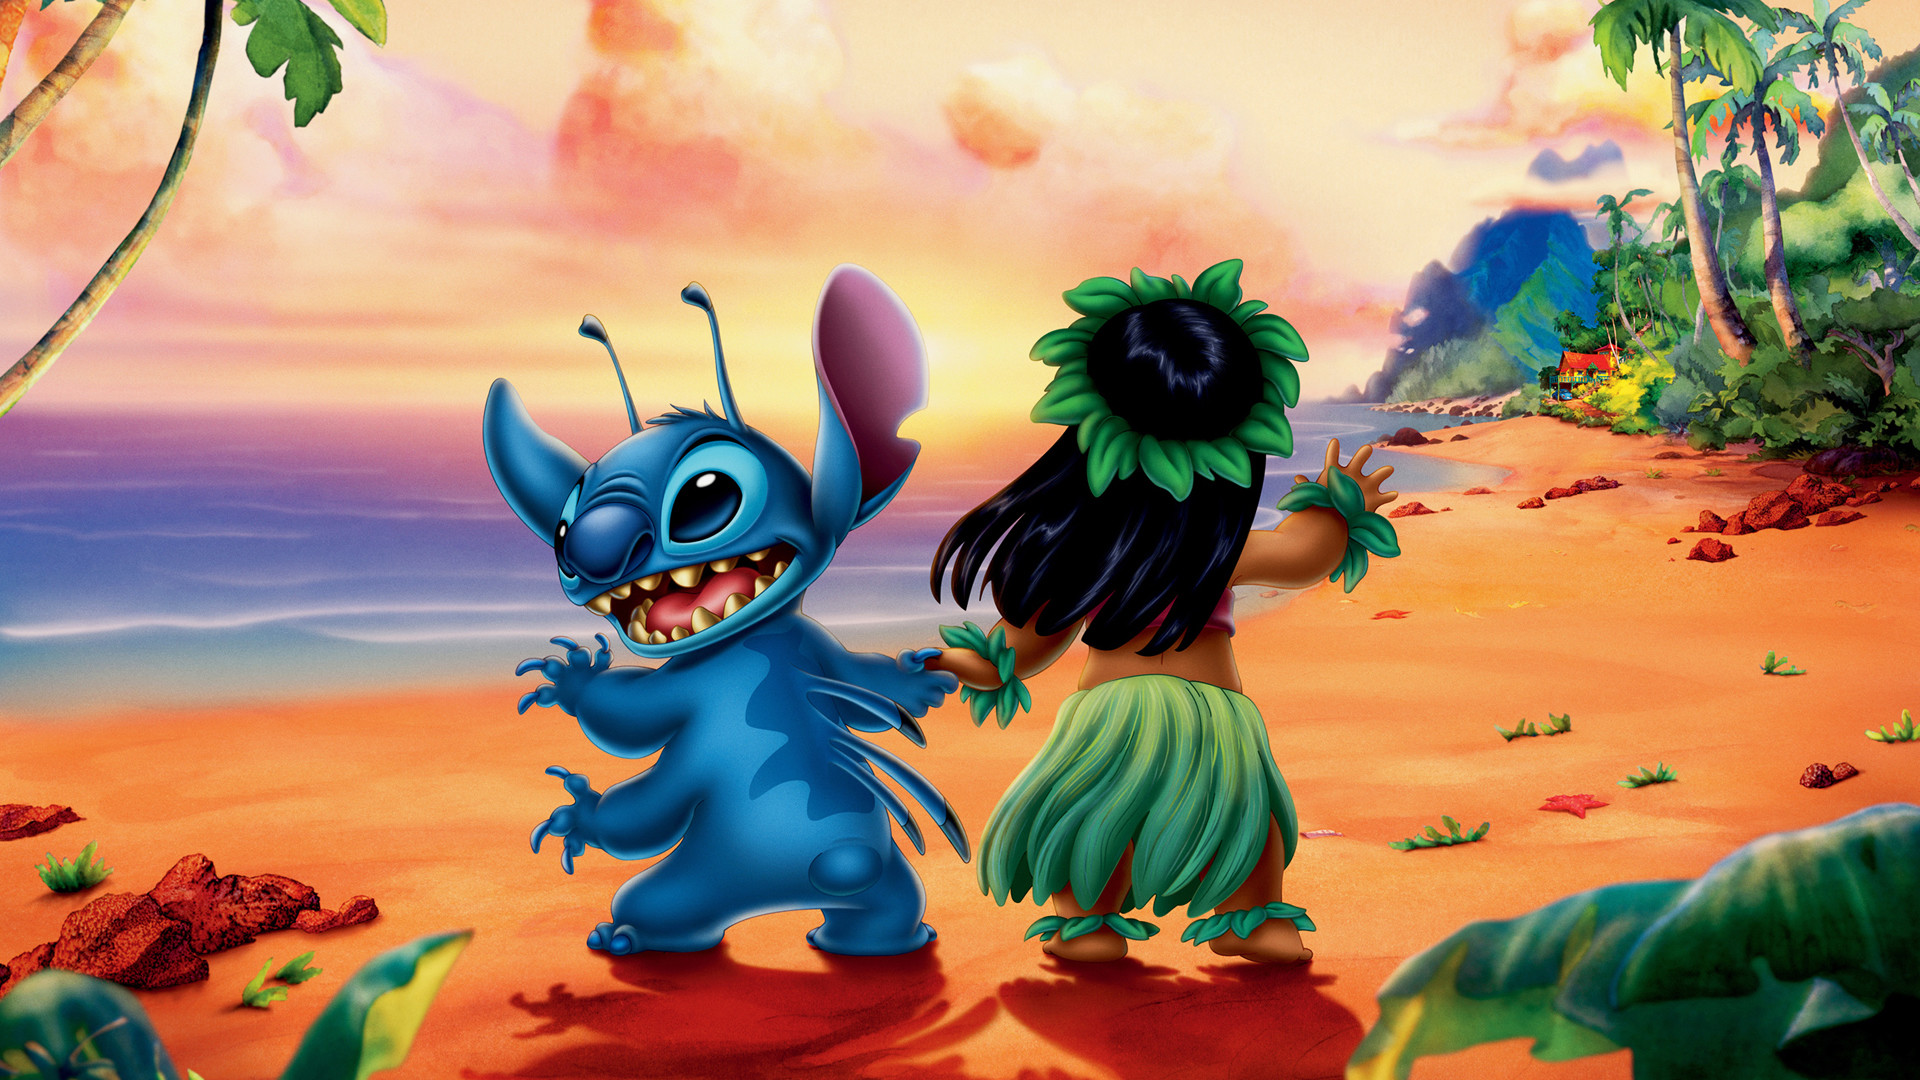 Cute Lilo And Stitch Wallpapers